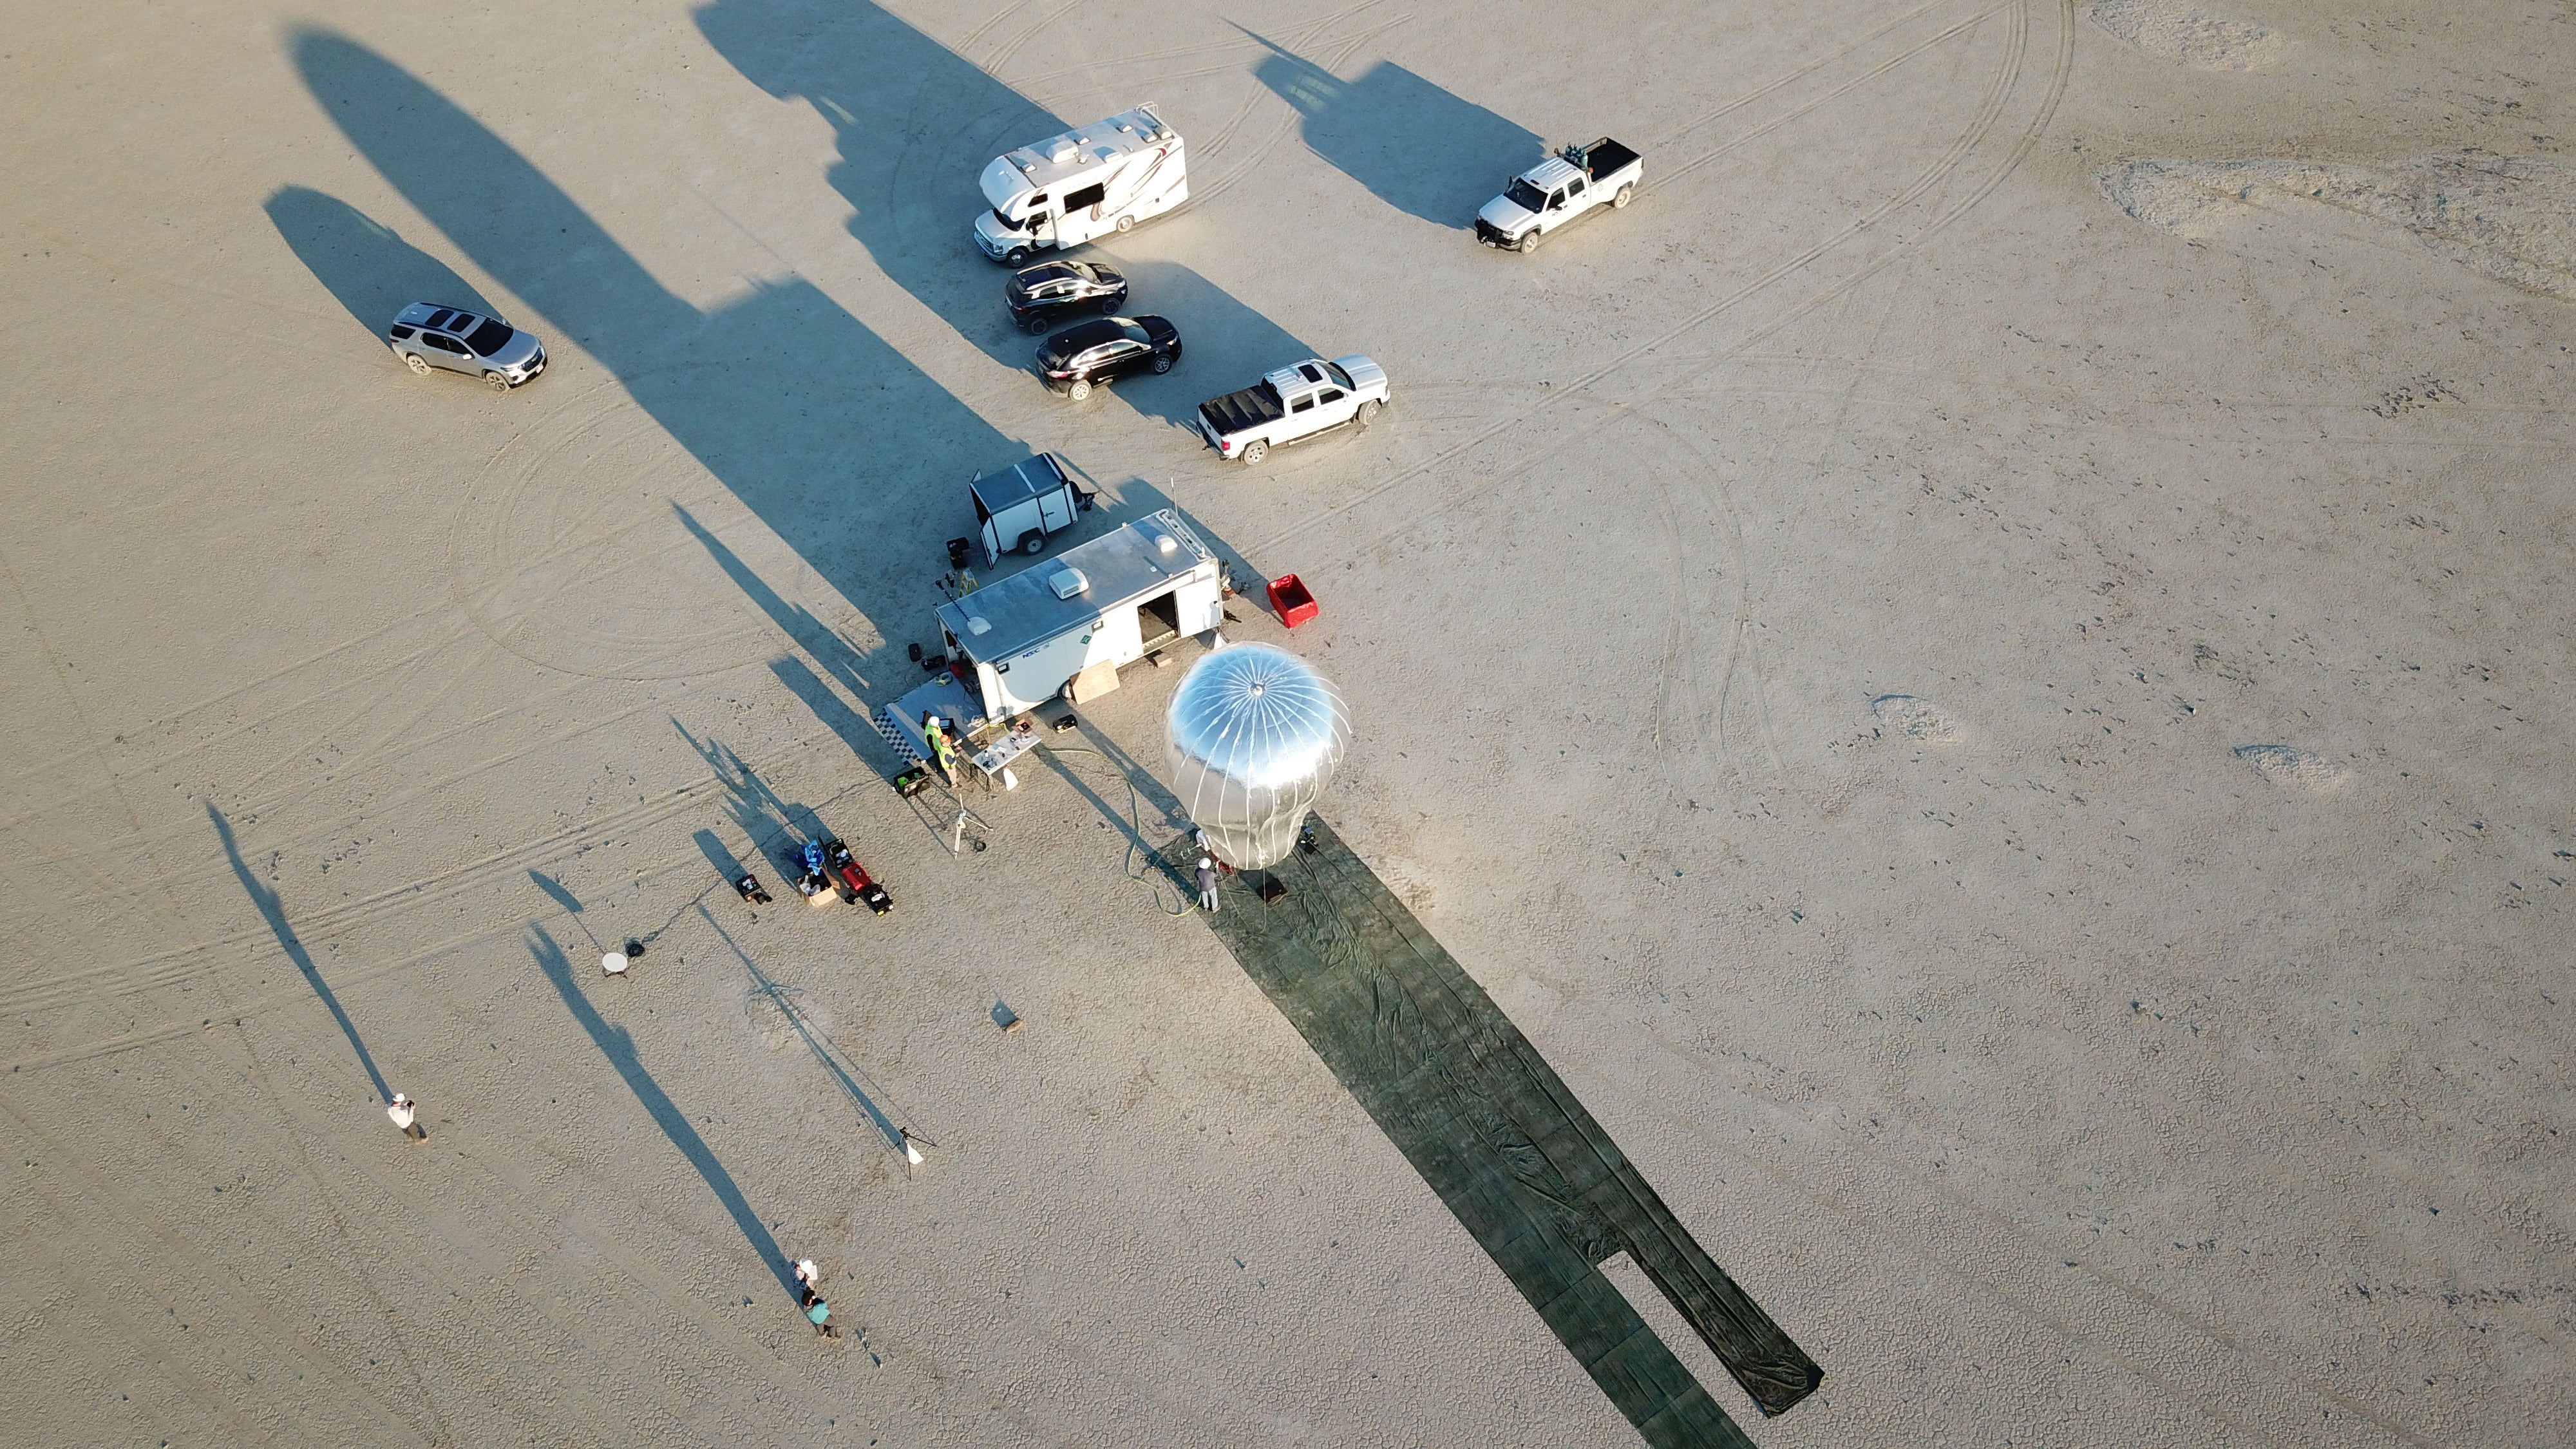 The team prepared the aerobot balloon for liftoff. (Photo: Near Space Corporation)